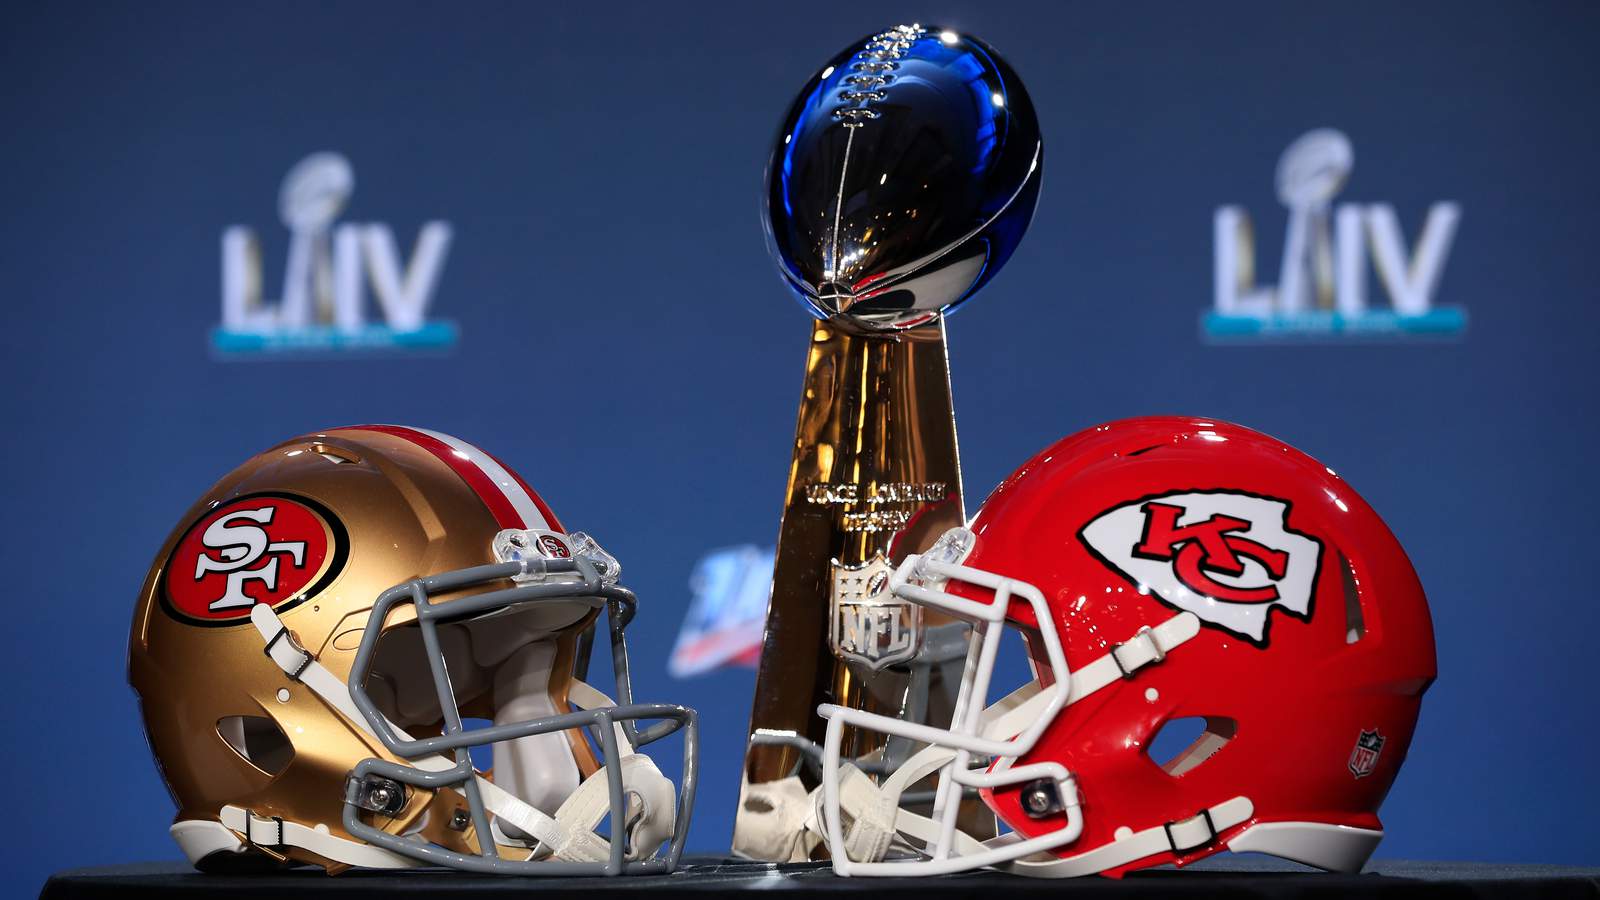 Employers, beware of Monday’s Super Bowl fever